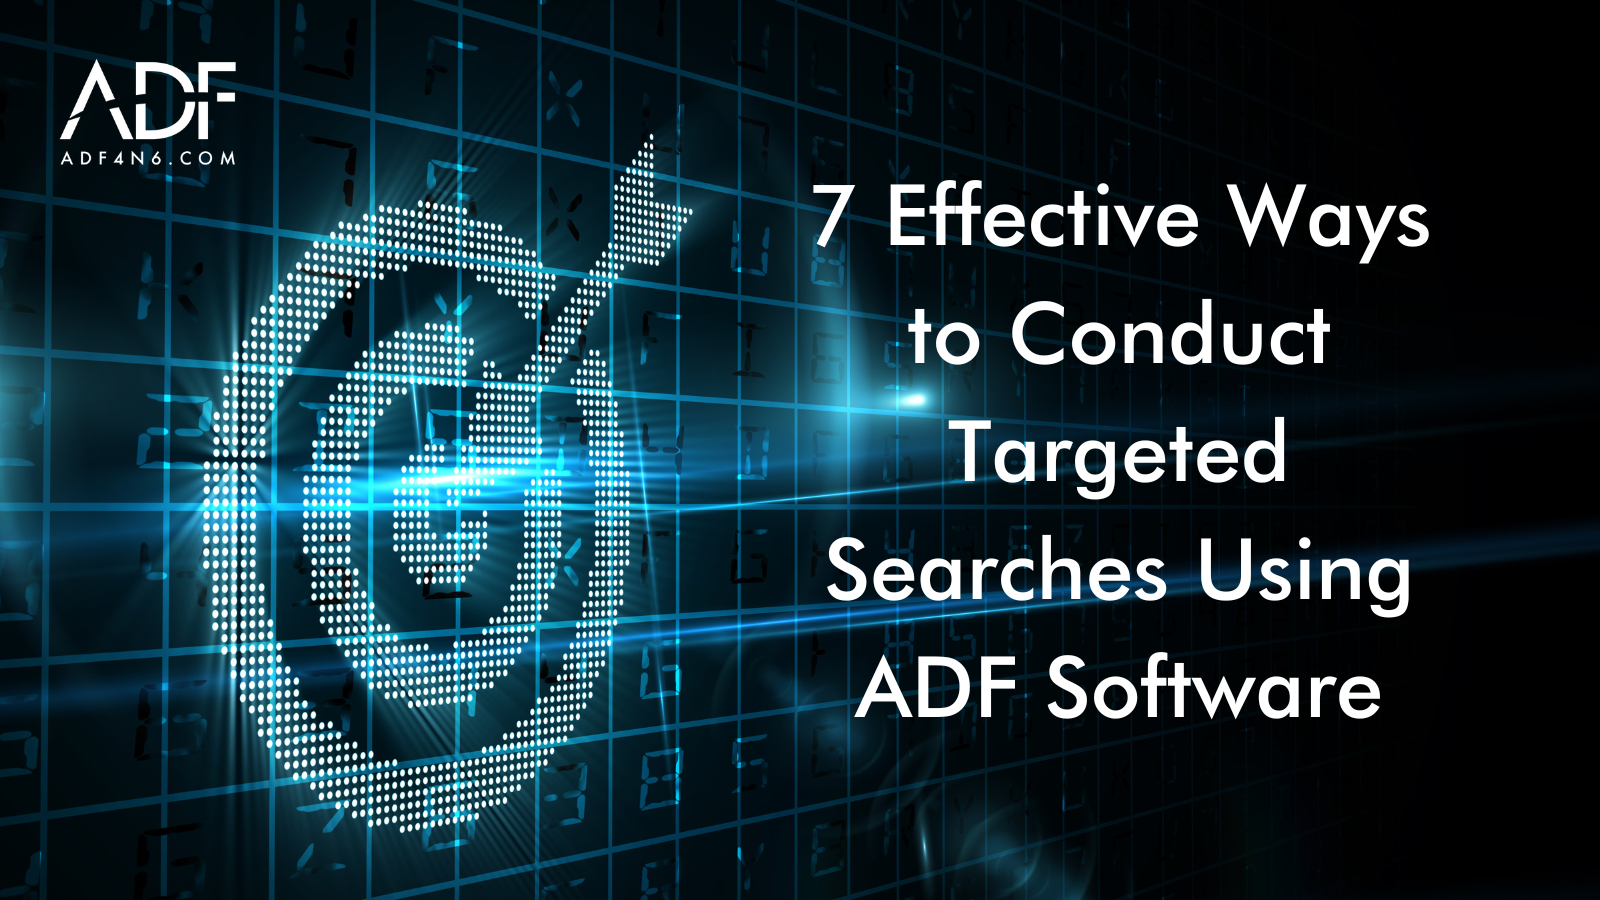 7 Effective Ways to Conduct Targeted Searches Using ADF Software